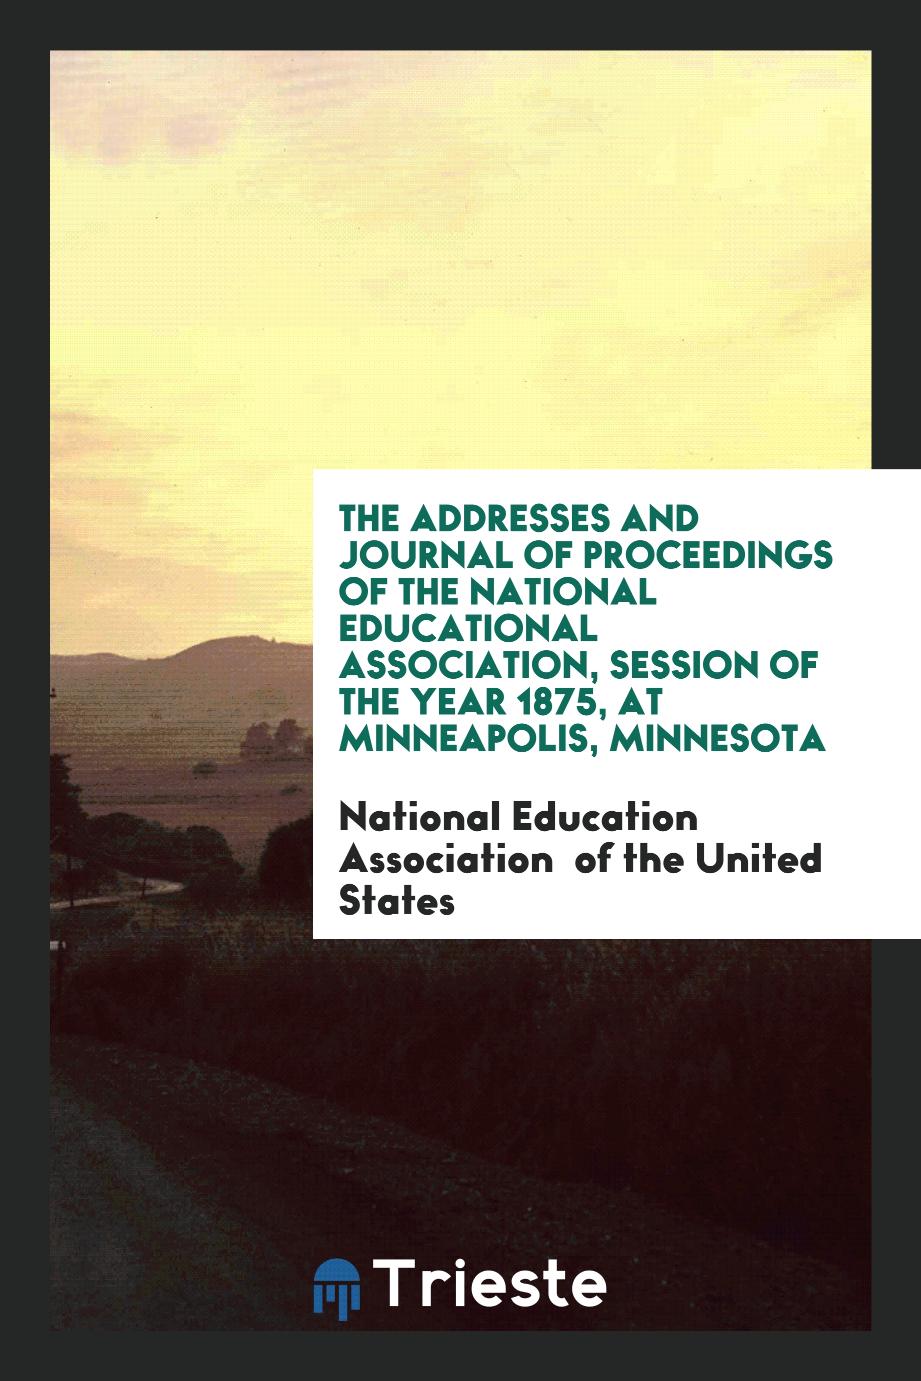 The Addresses and Journal of Proceedings of the National Educational Association, Session of the Year 1875, at Minneapolis, Minnesota